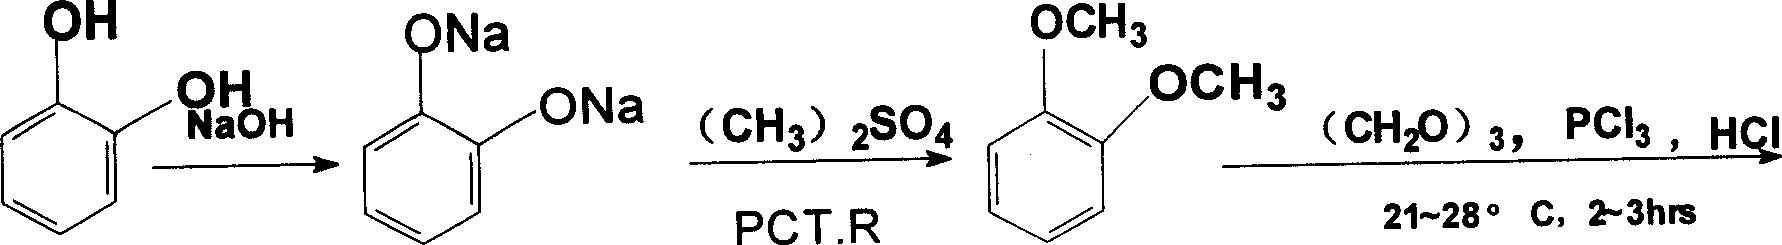 Synthesis process of palmatine and its salts